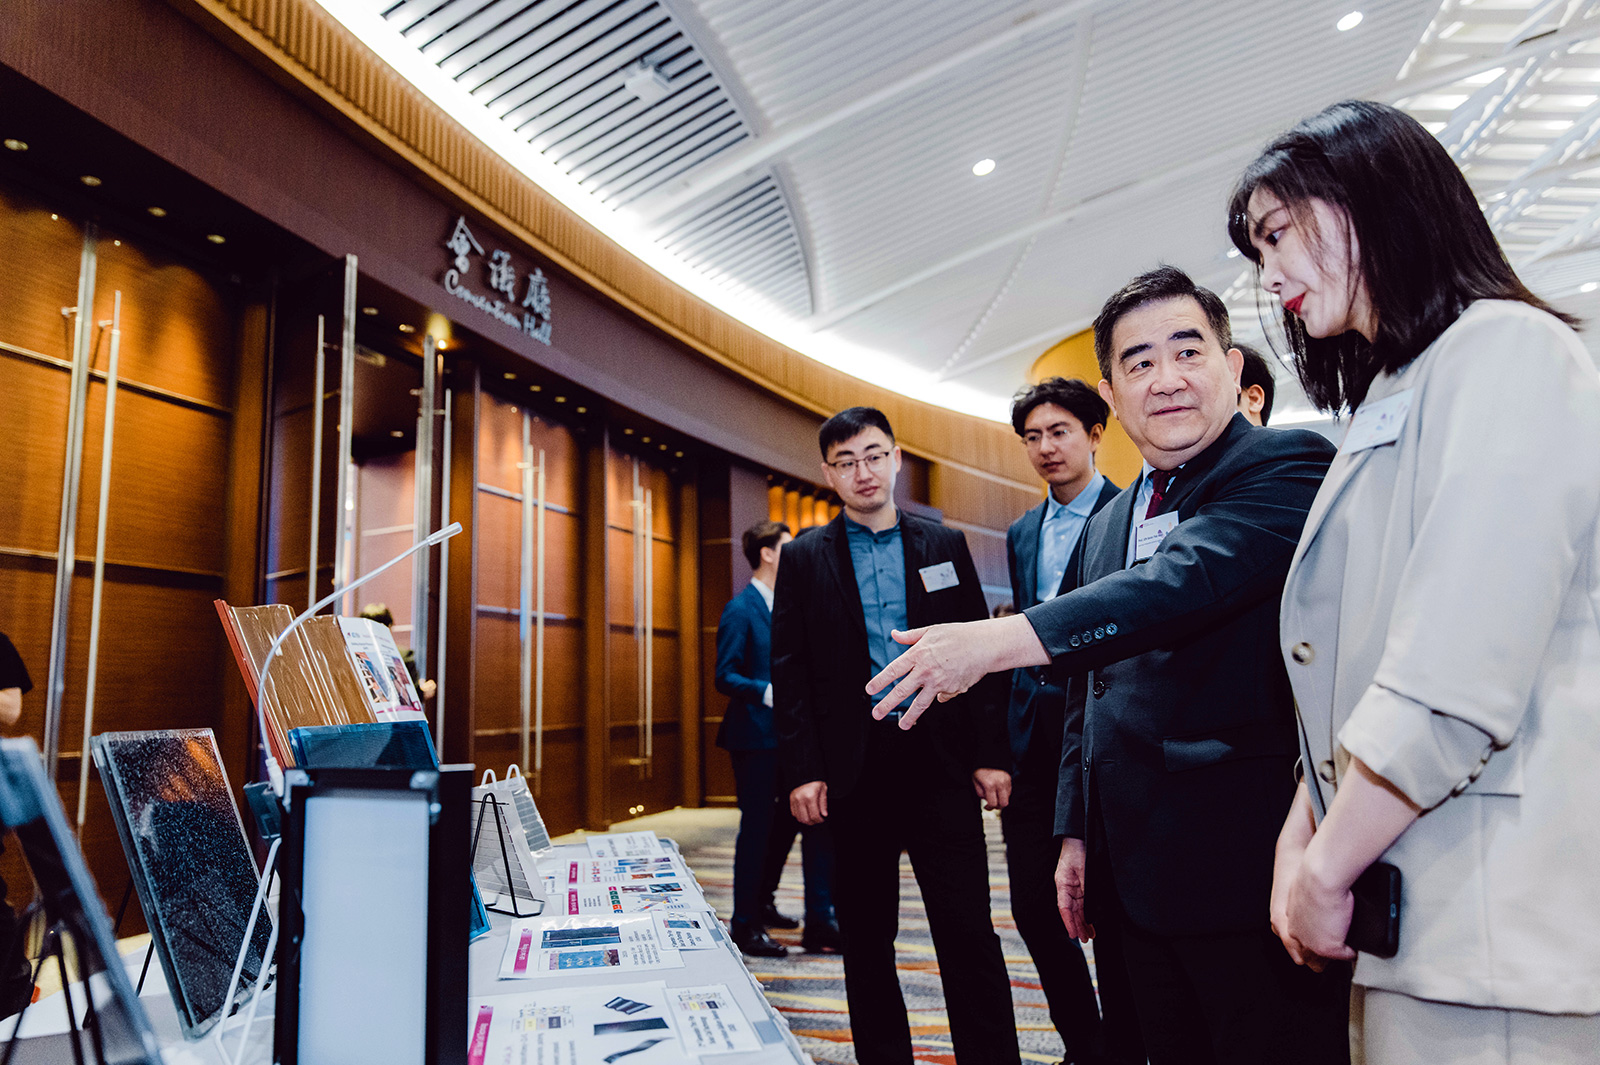 A student project exhibition was held before the Luncheon, and a number of entrepreneurs spoke highly of CityU students' creative thinking and innovative inventions.